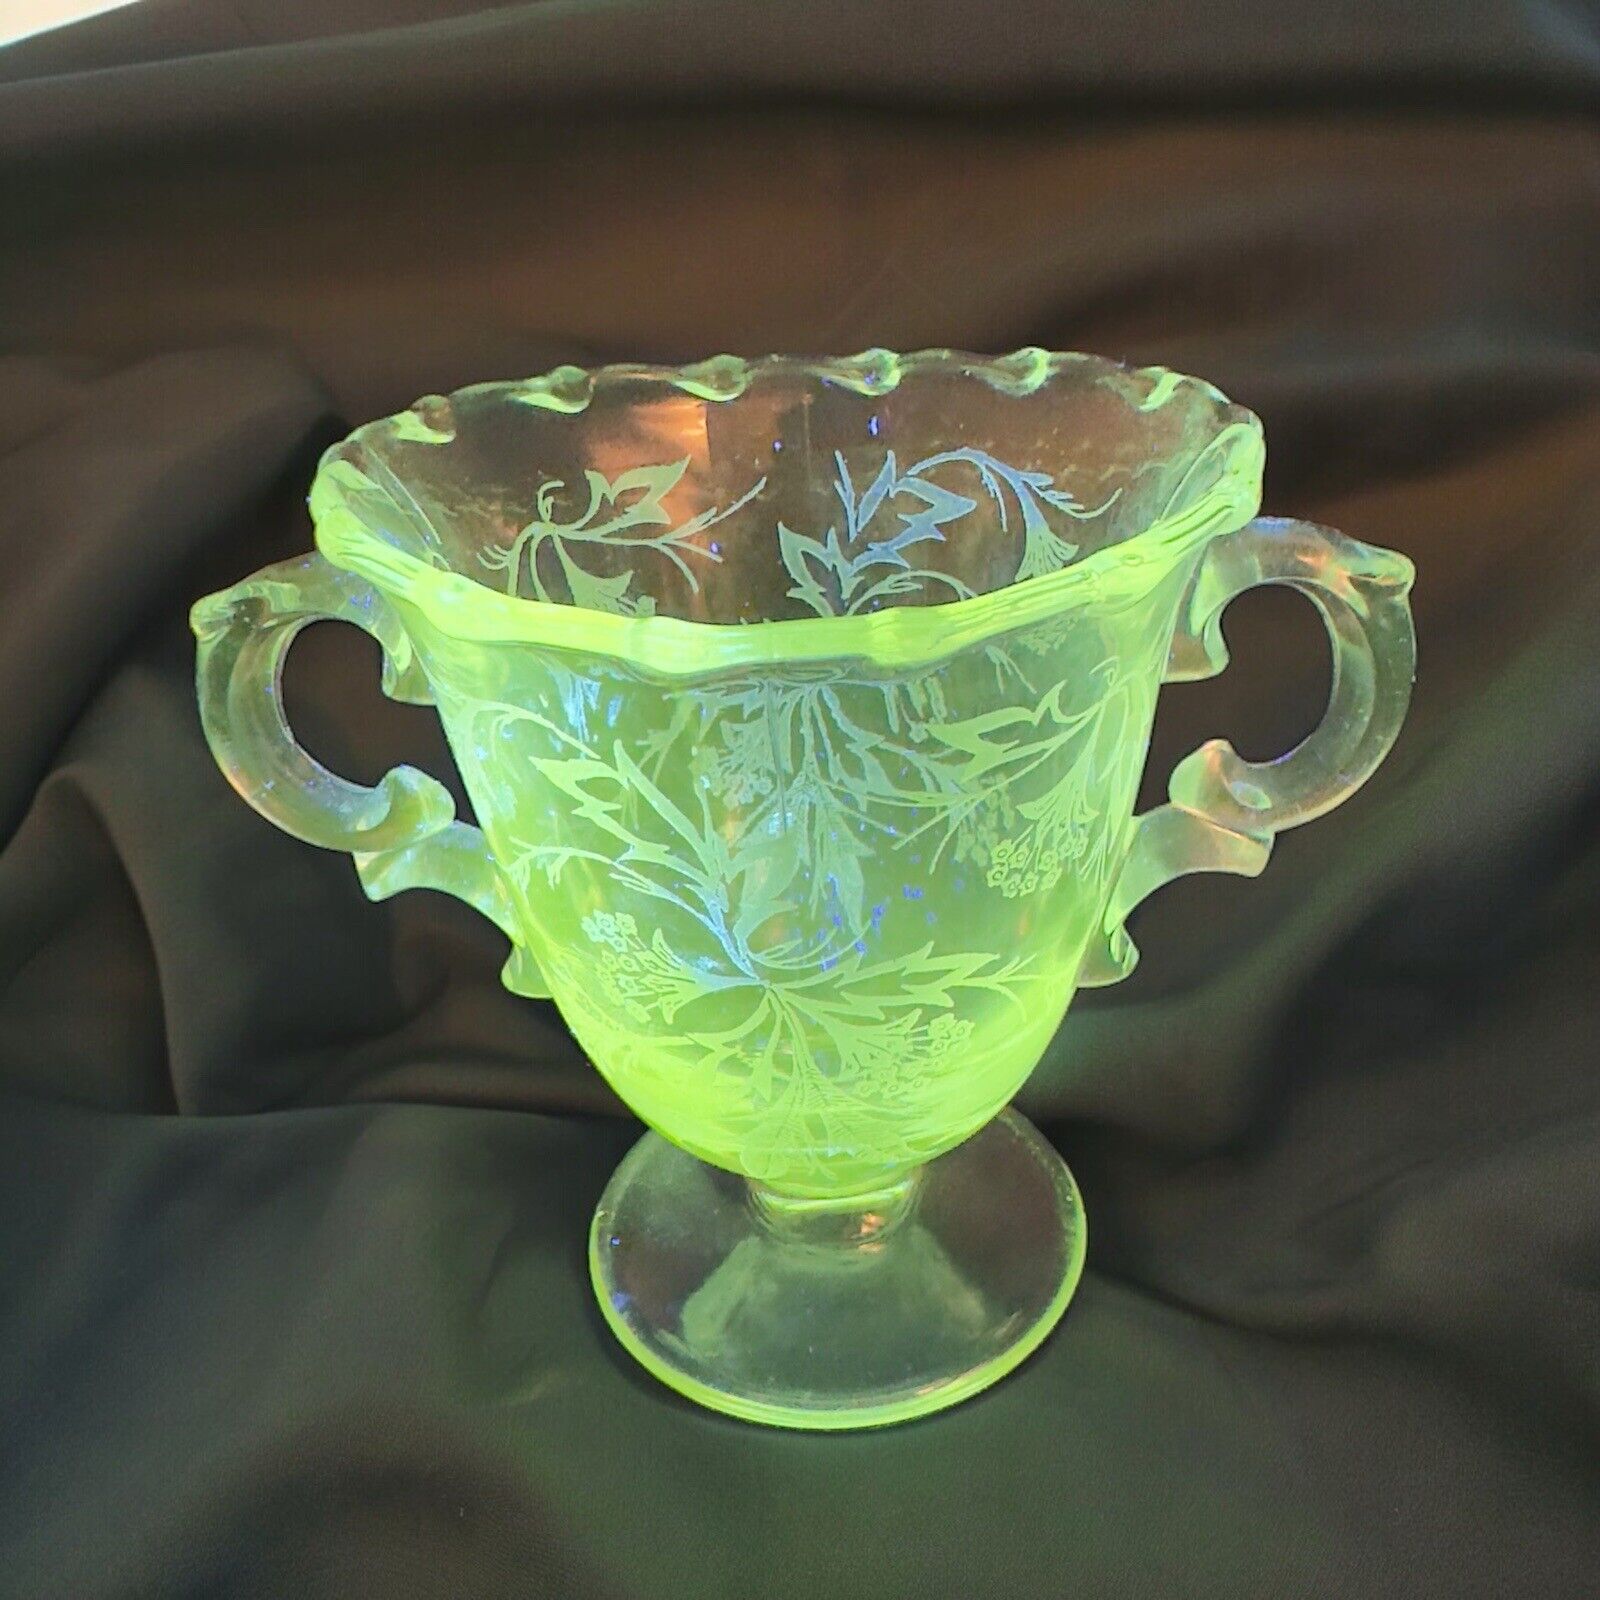 Fostoria USA Heather Etched Sugar Bowl With Handles Clear Manganese 365nm Green